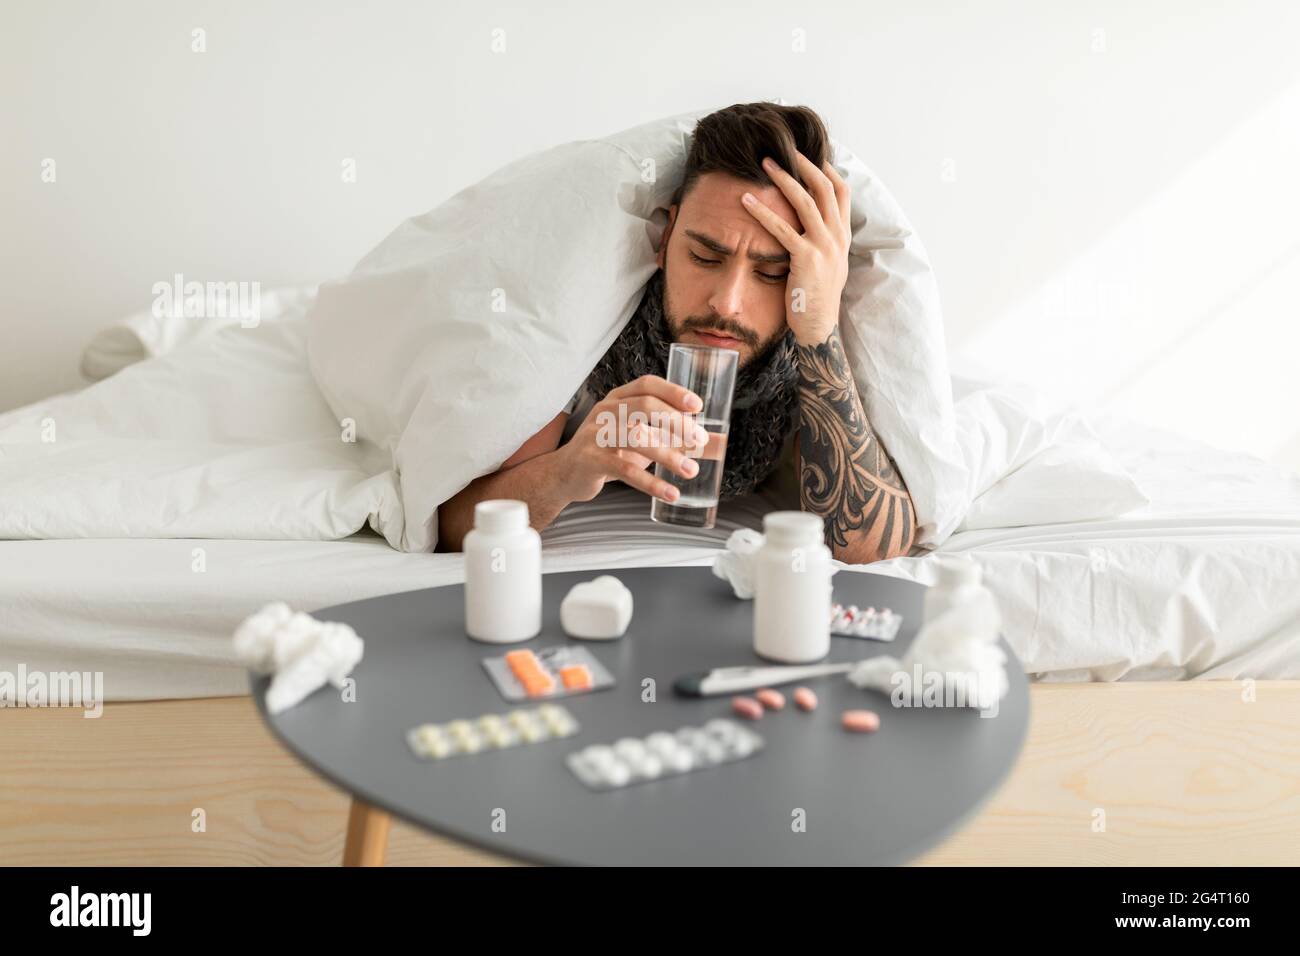 Sick man touching forehead and drinking water, having fever during influenza illness, lying in bed under blanket. Covid-19 coronavirus and seasonal fl Stock Photo